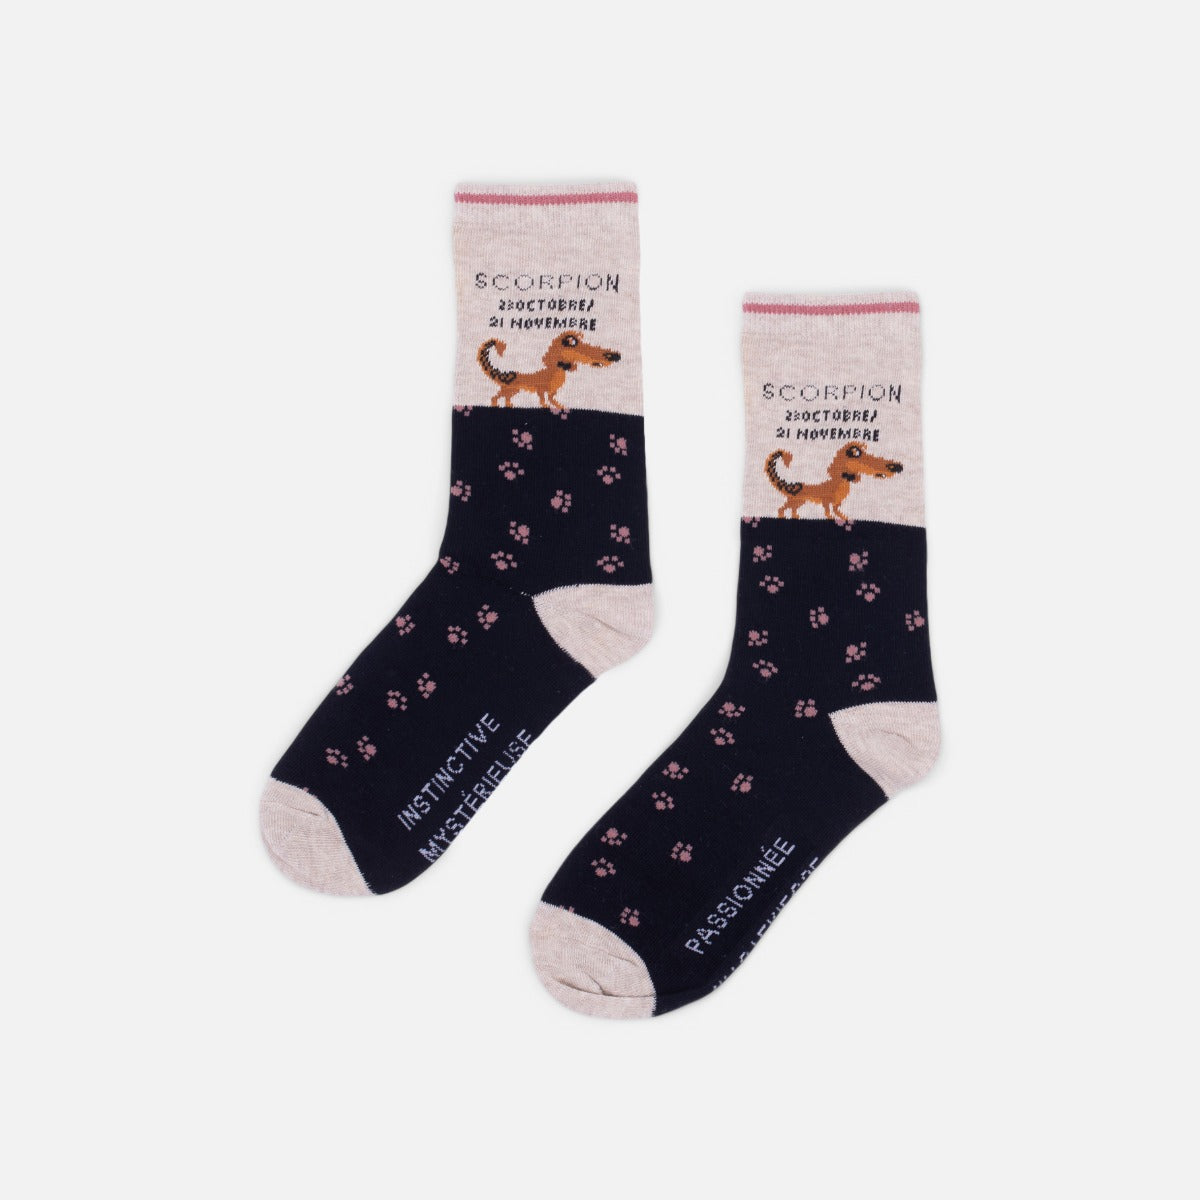 Navy blue and beige socks astrological sign "scorpio"